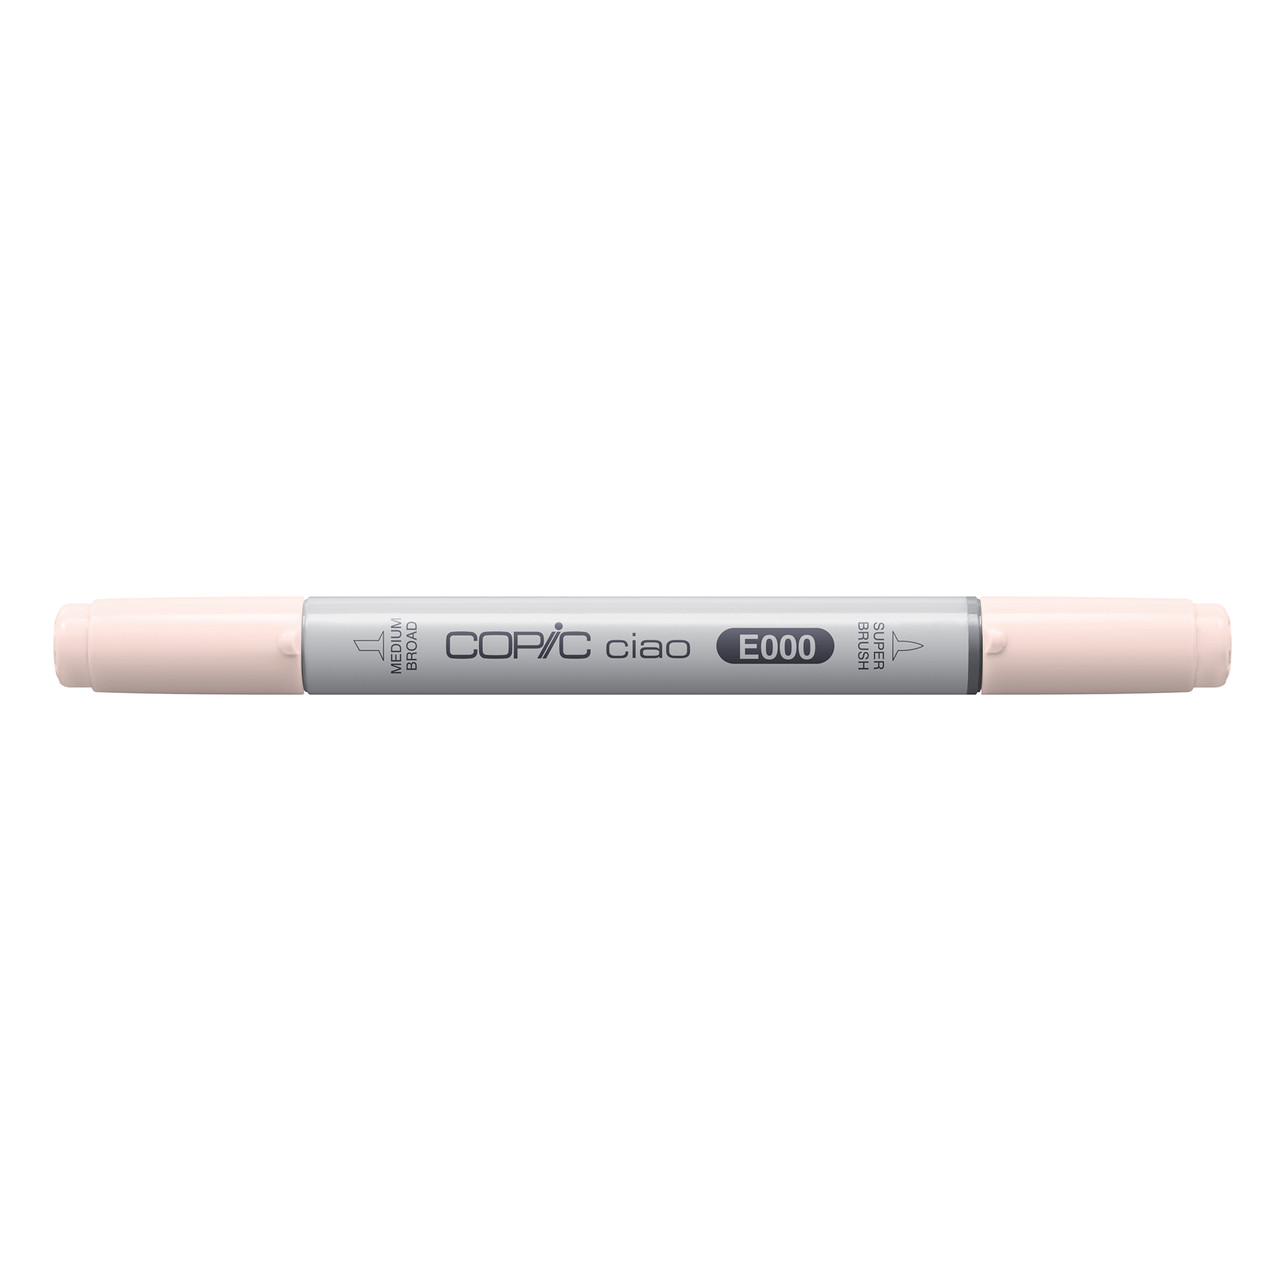 Copic Ciao Marker Pale Fruit Pink E000